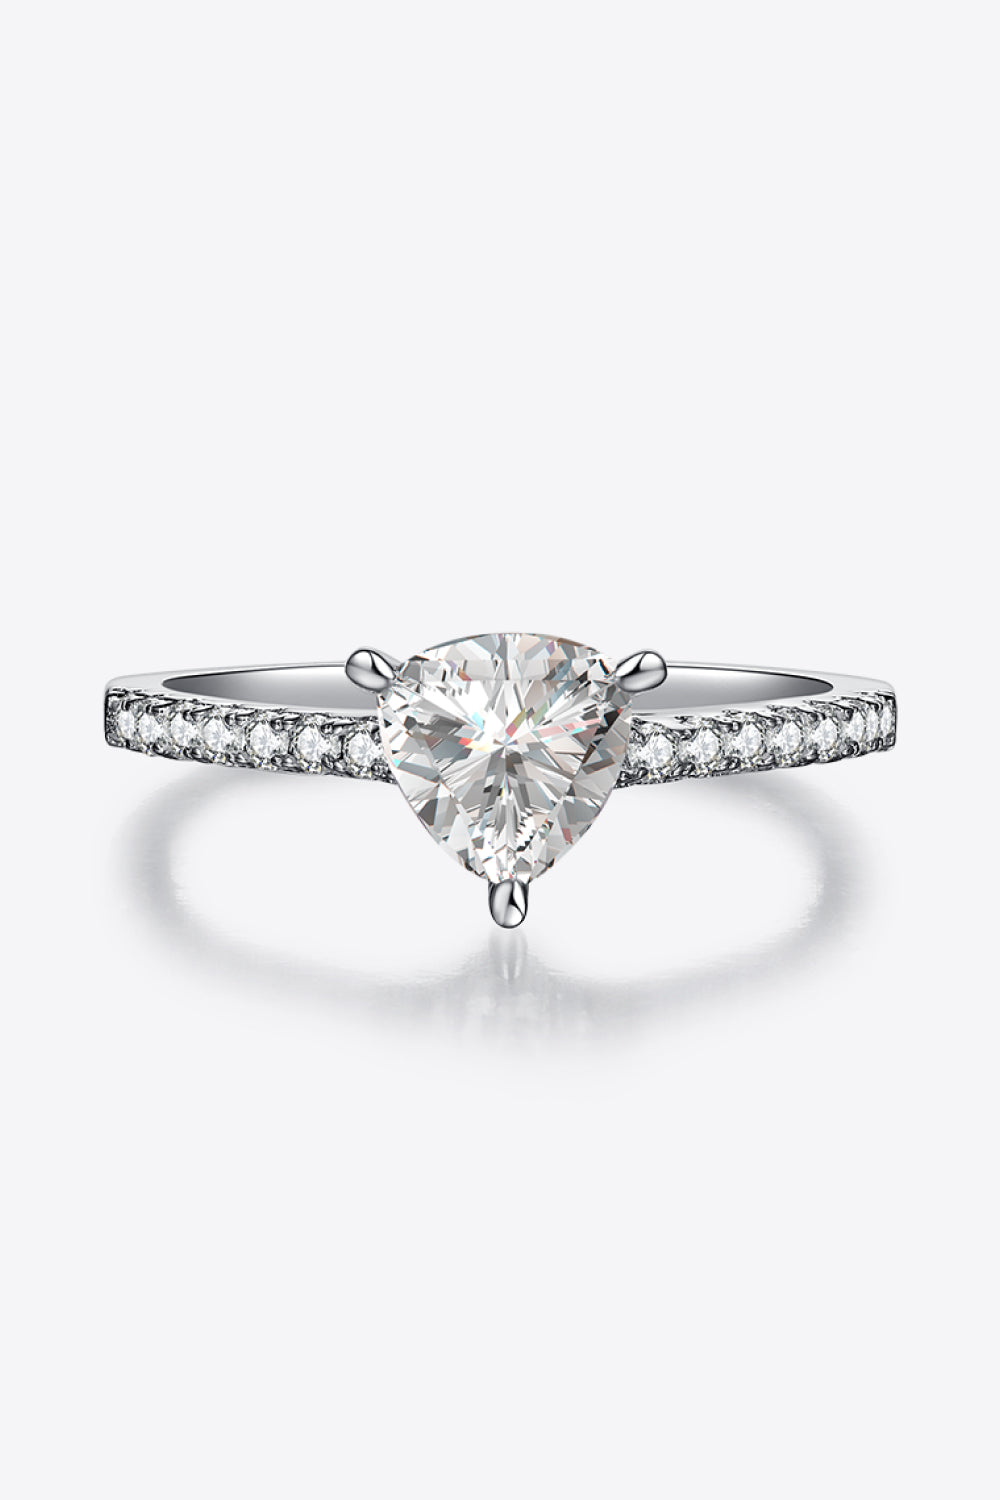 1 Carat Moissanite Triangle 925 Sterling Silver Ring - AllIn Computer